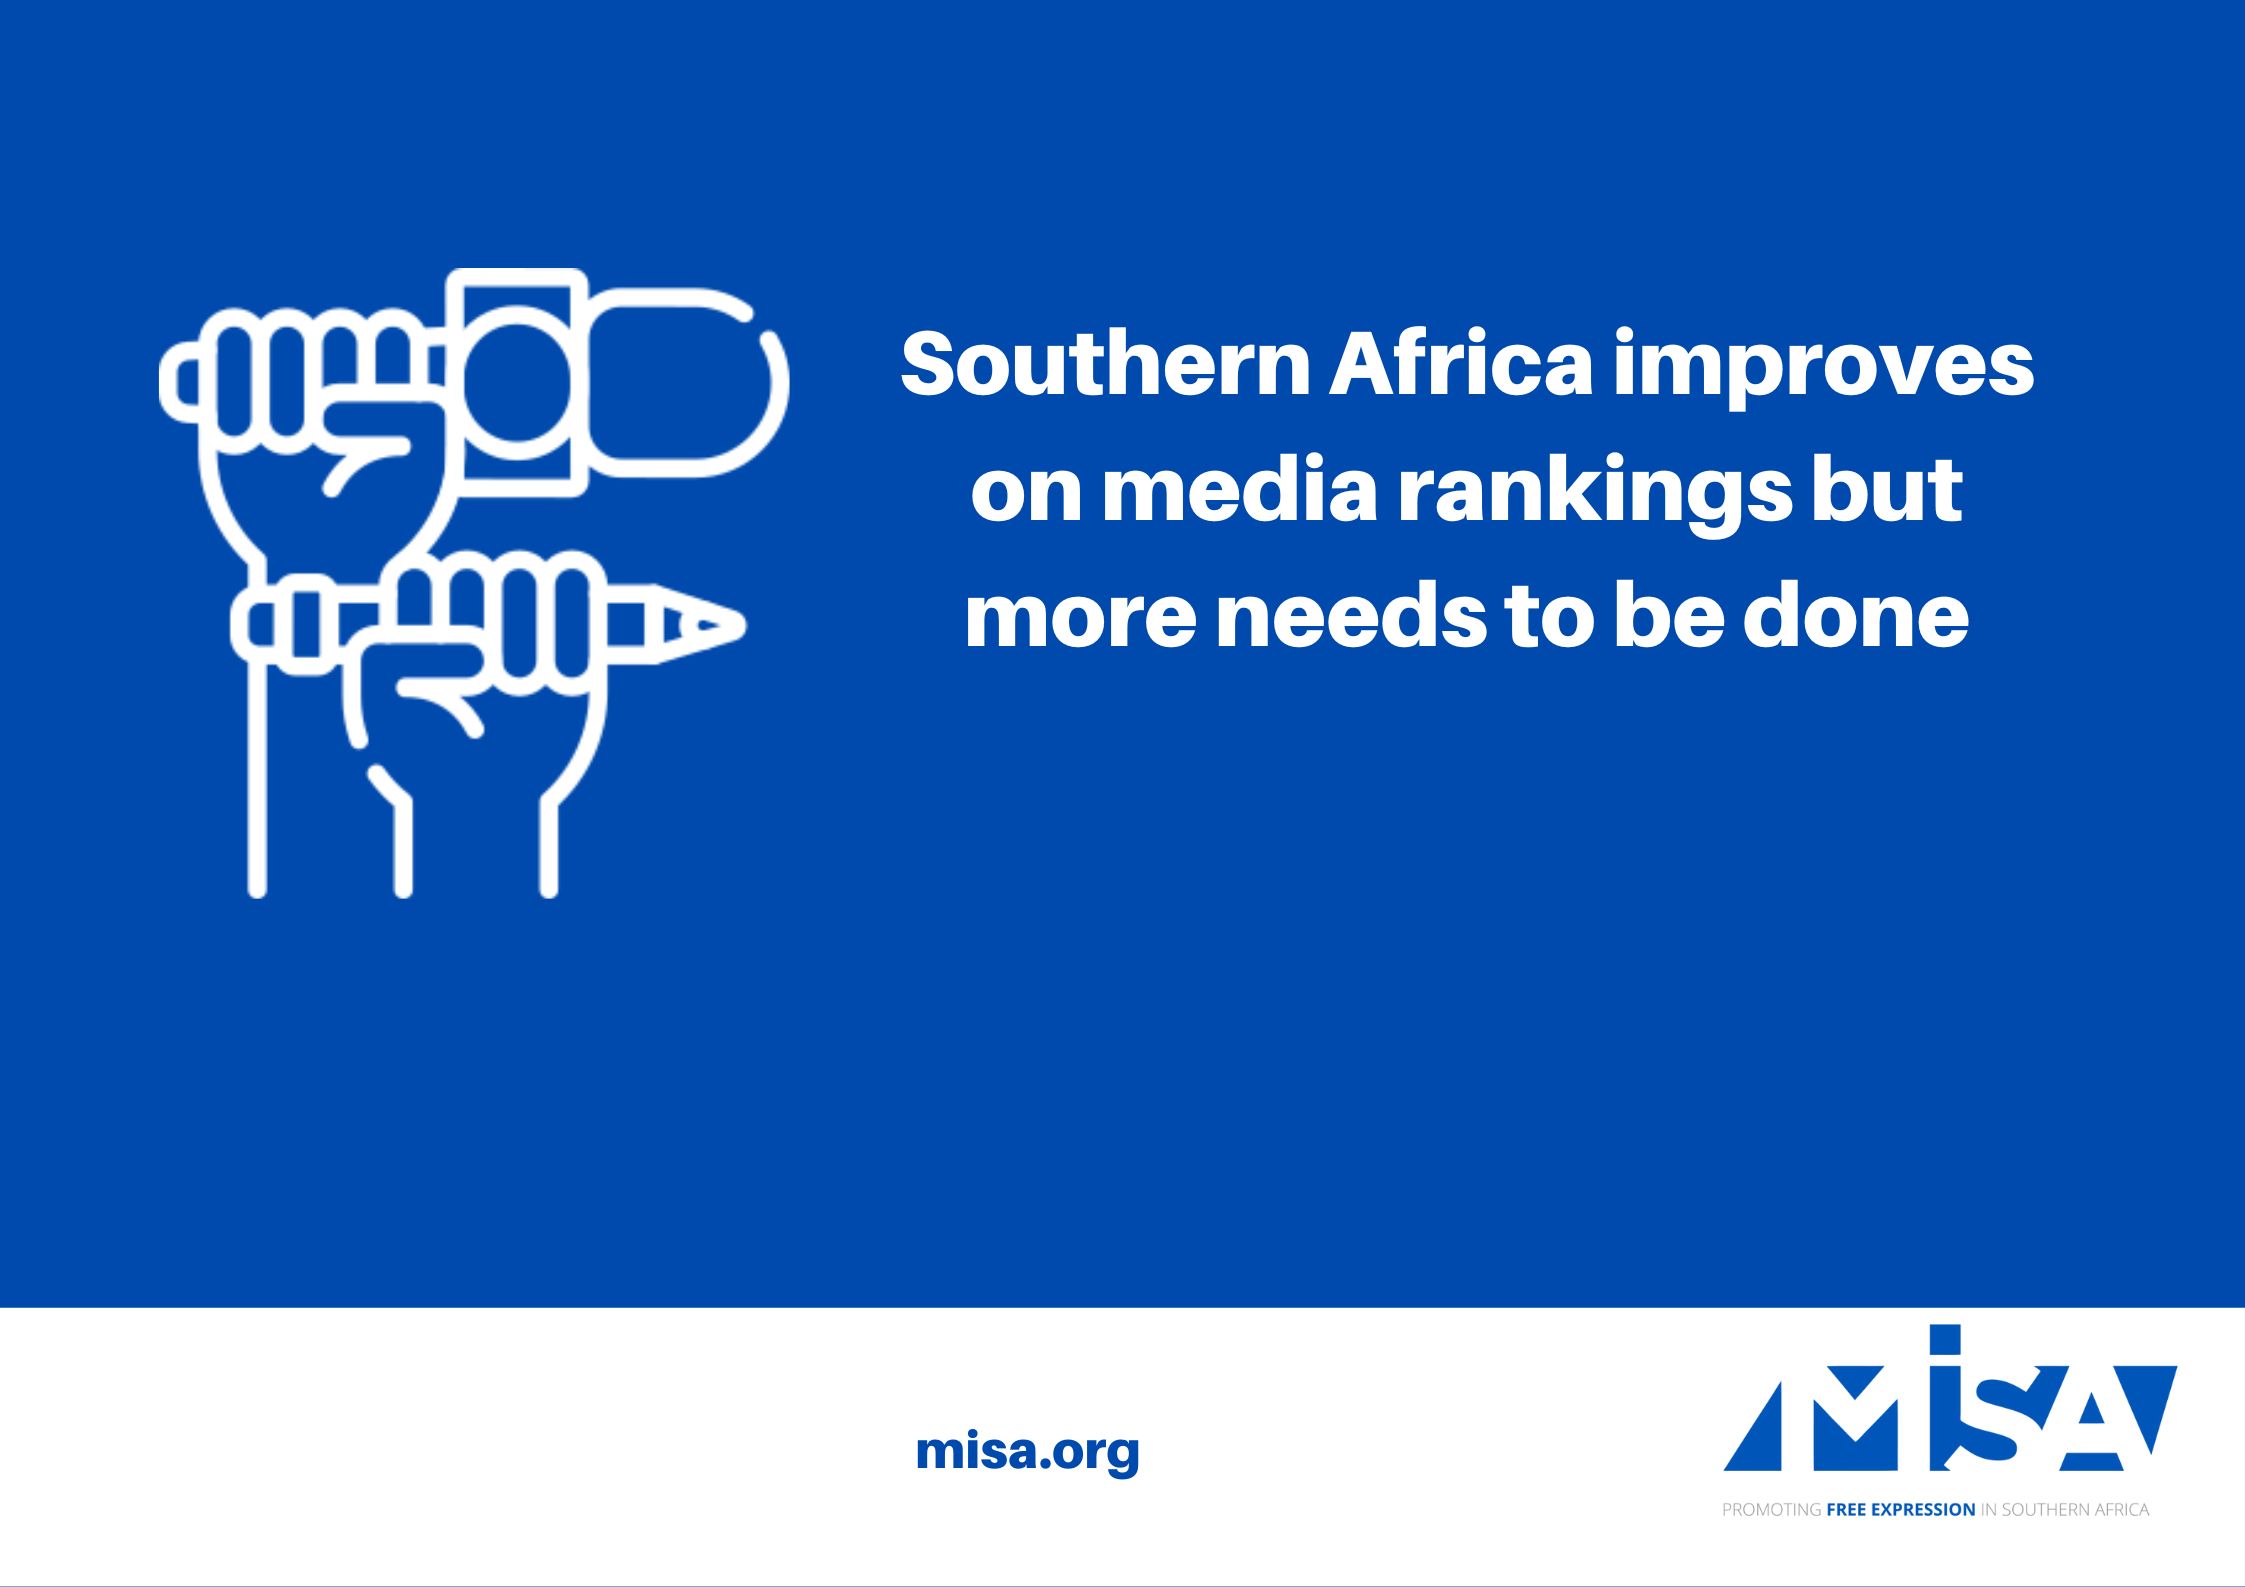 Southern Africa improves on media rankings but more needs to be done